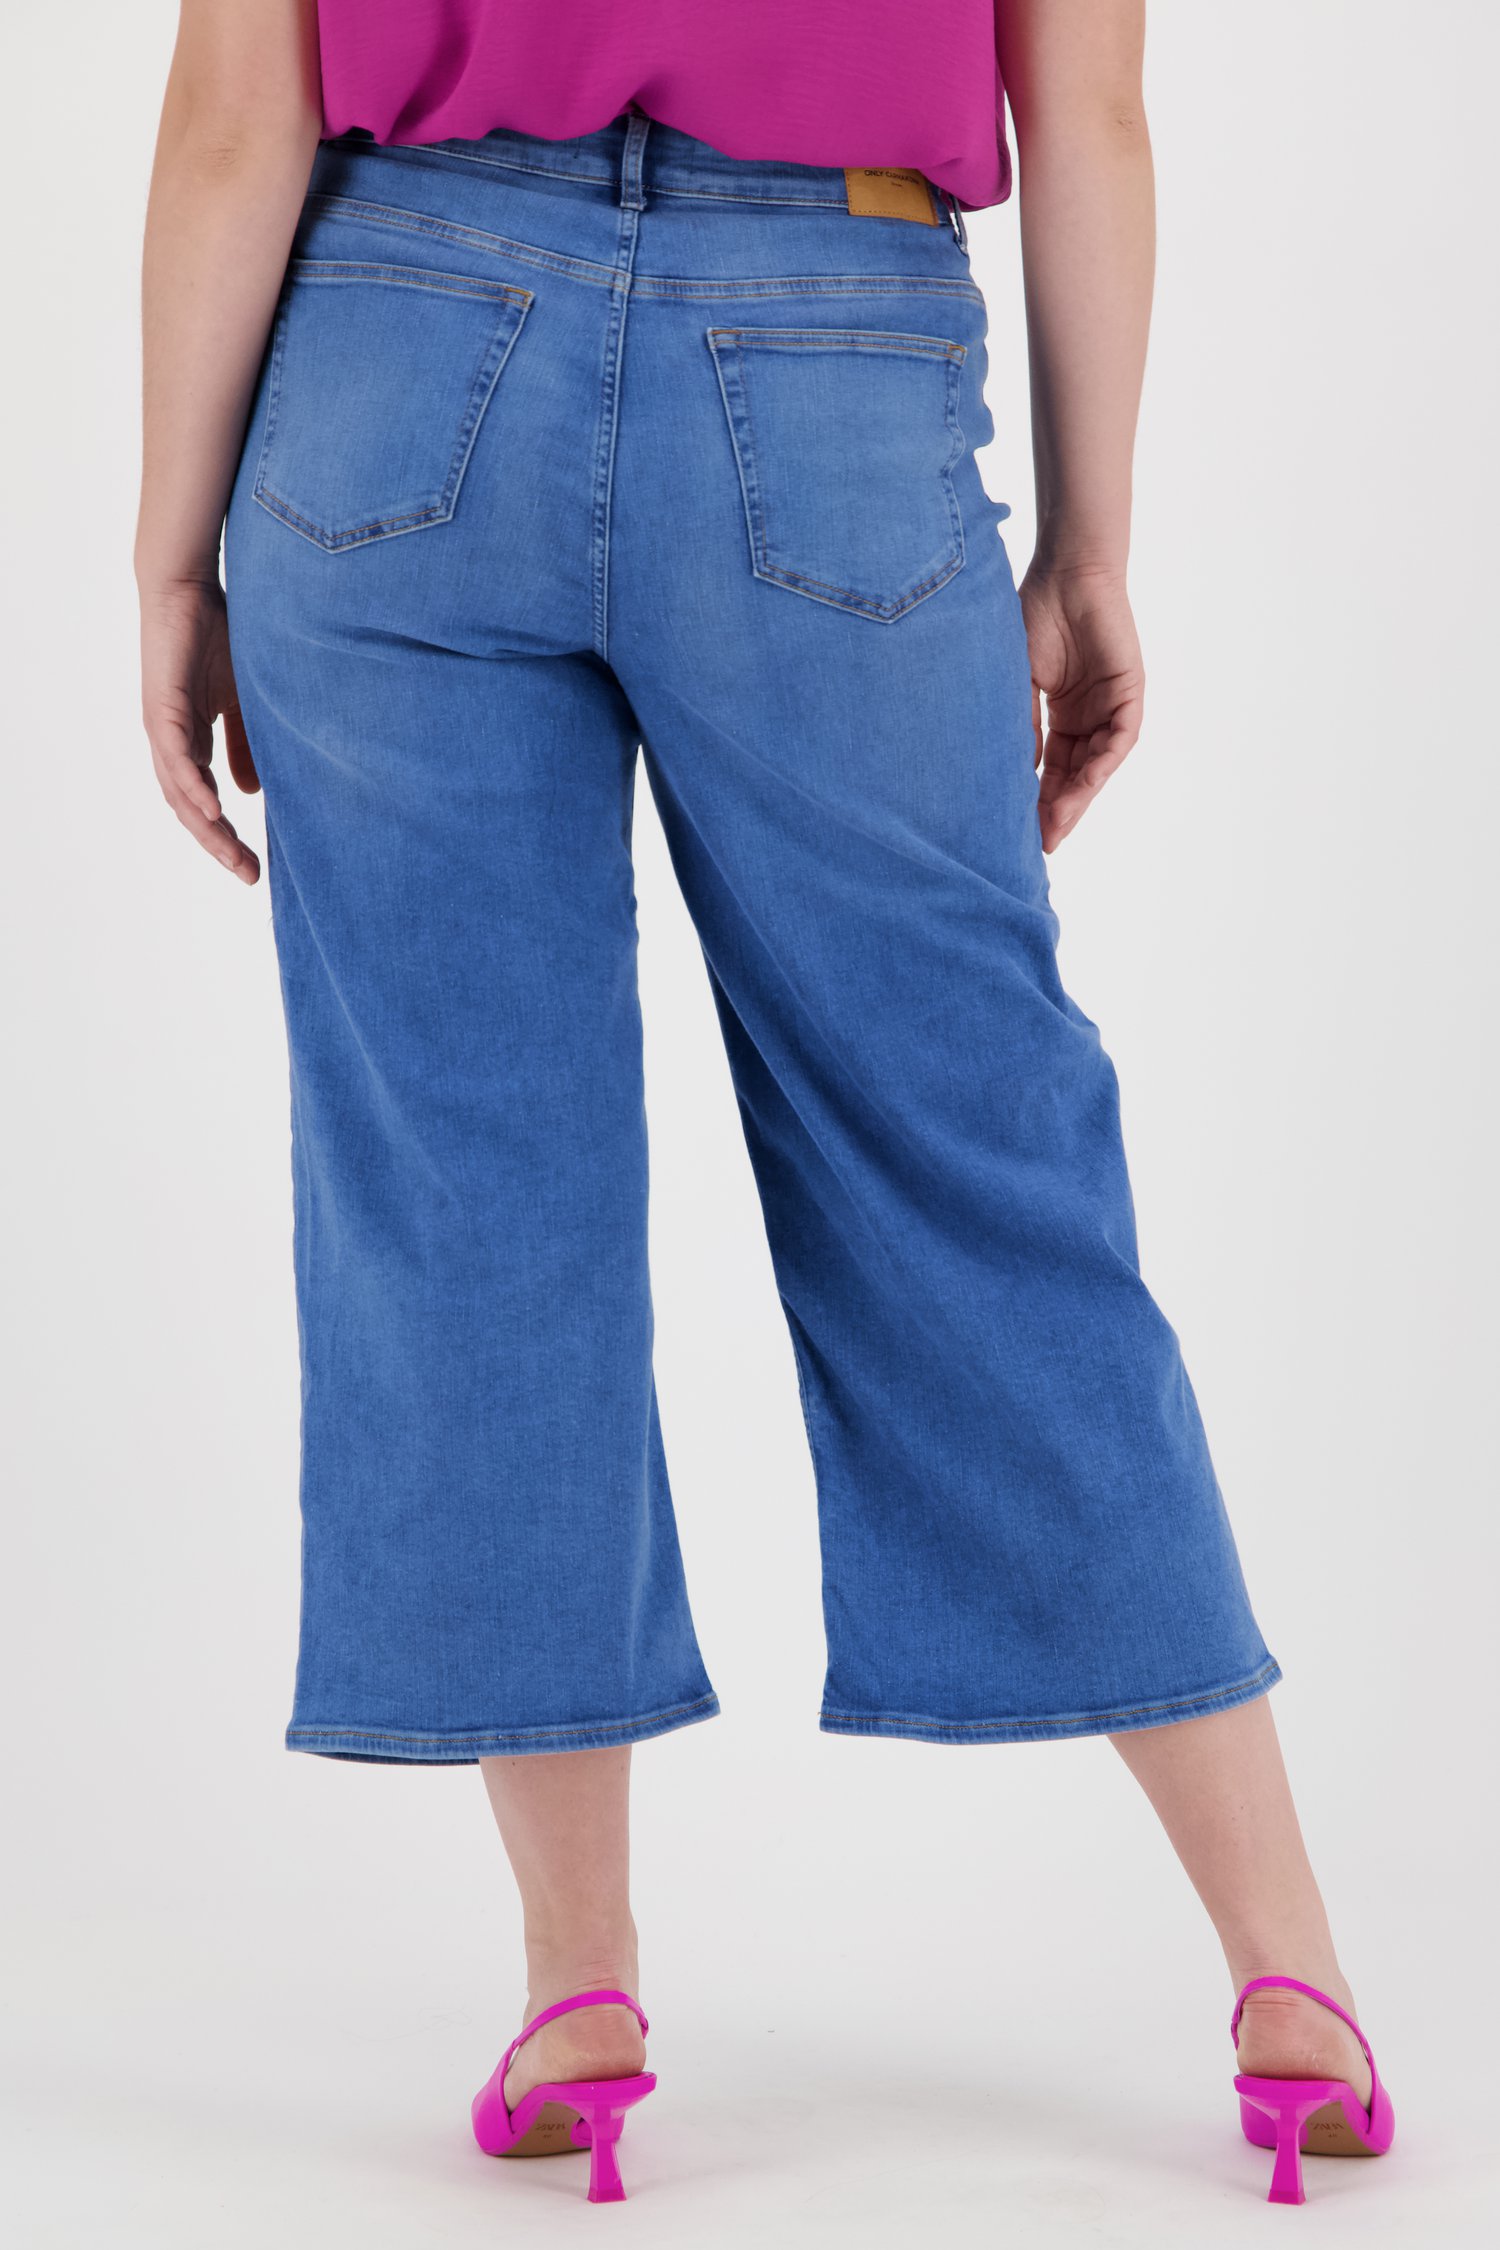 Jeans culotte - high waist van Only Carmakoma voor Dames